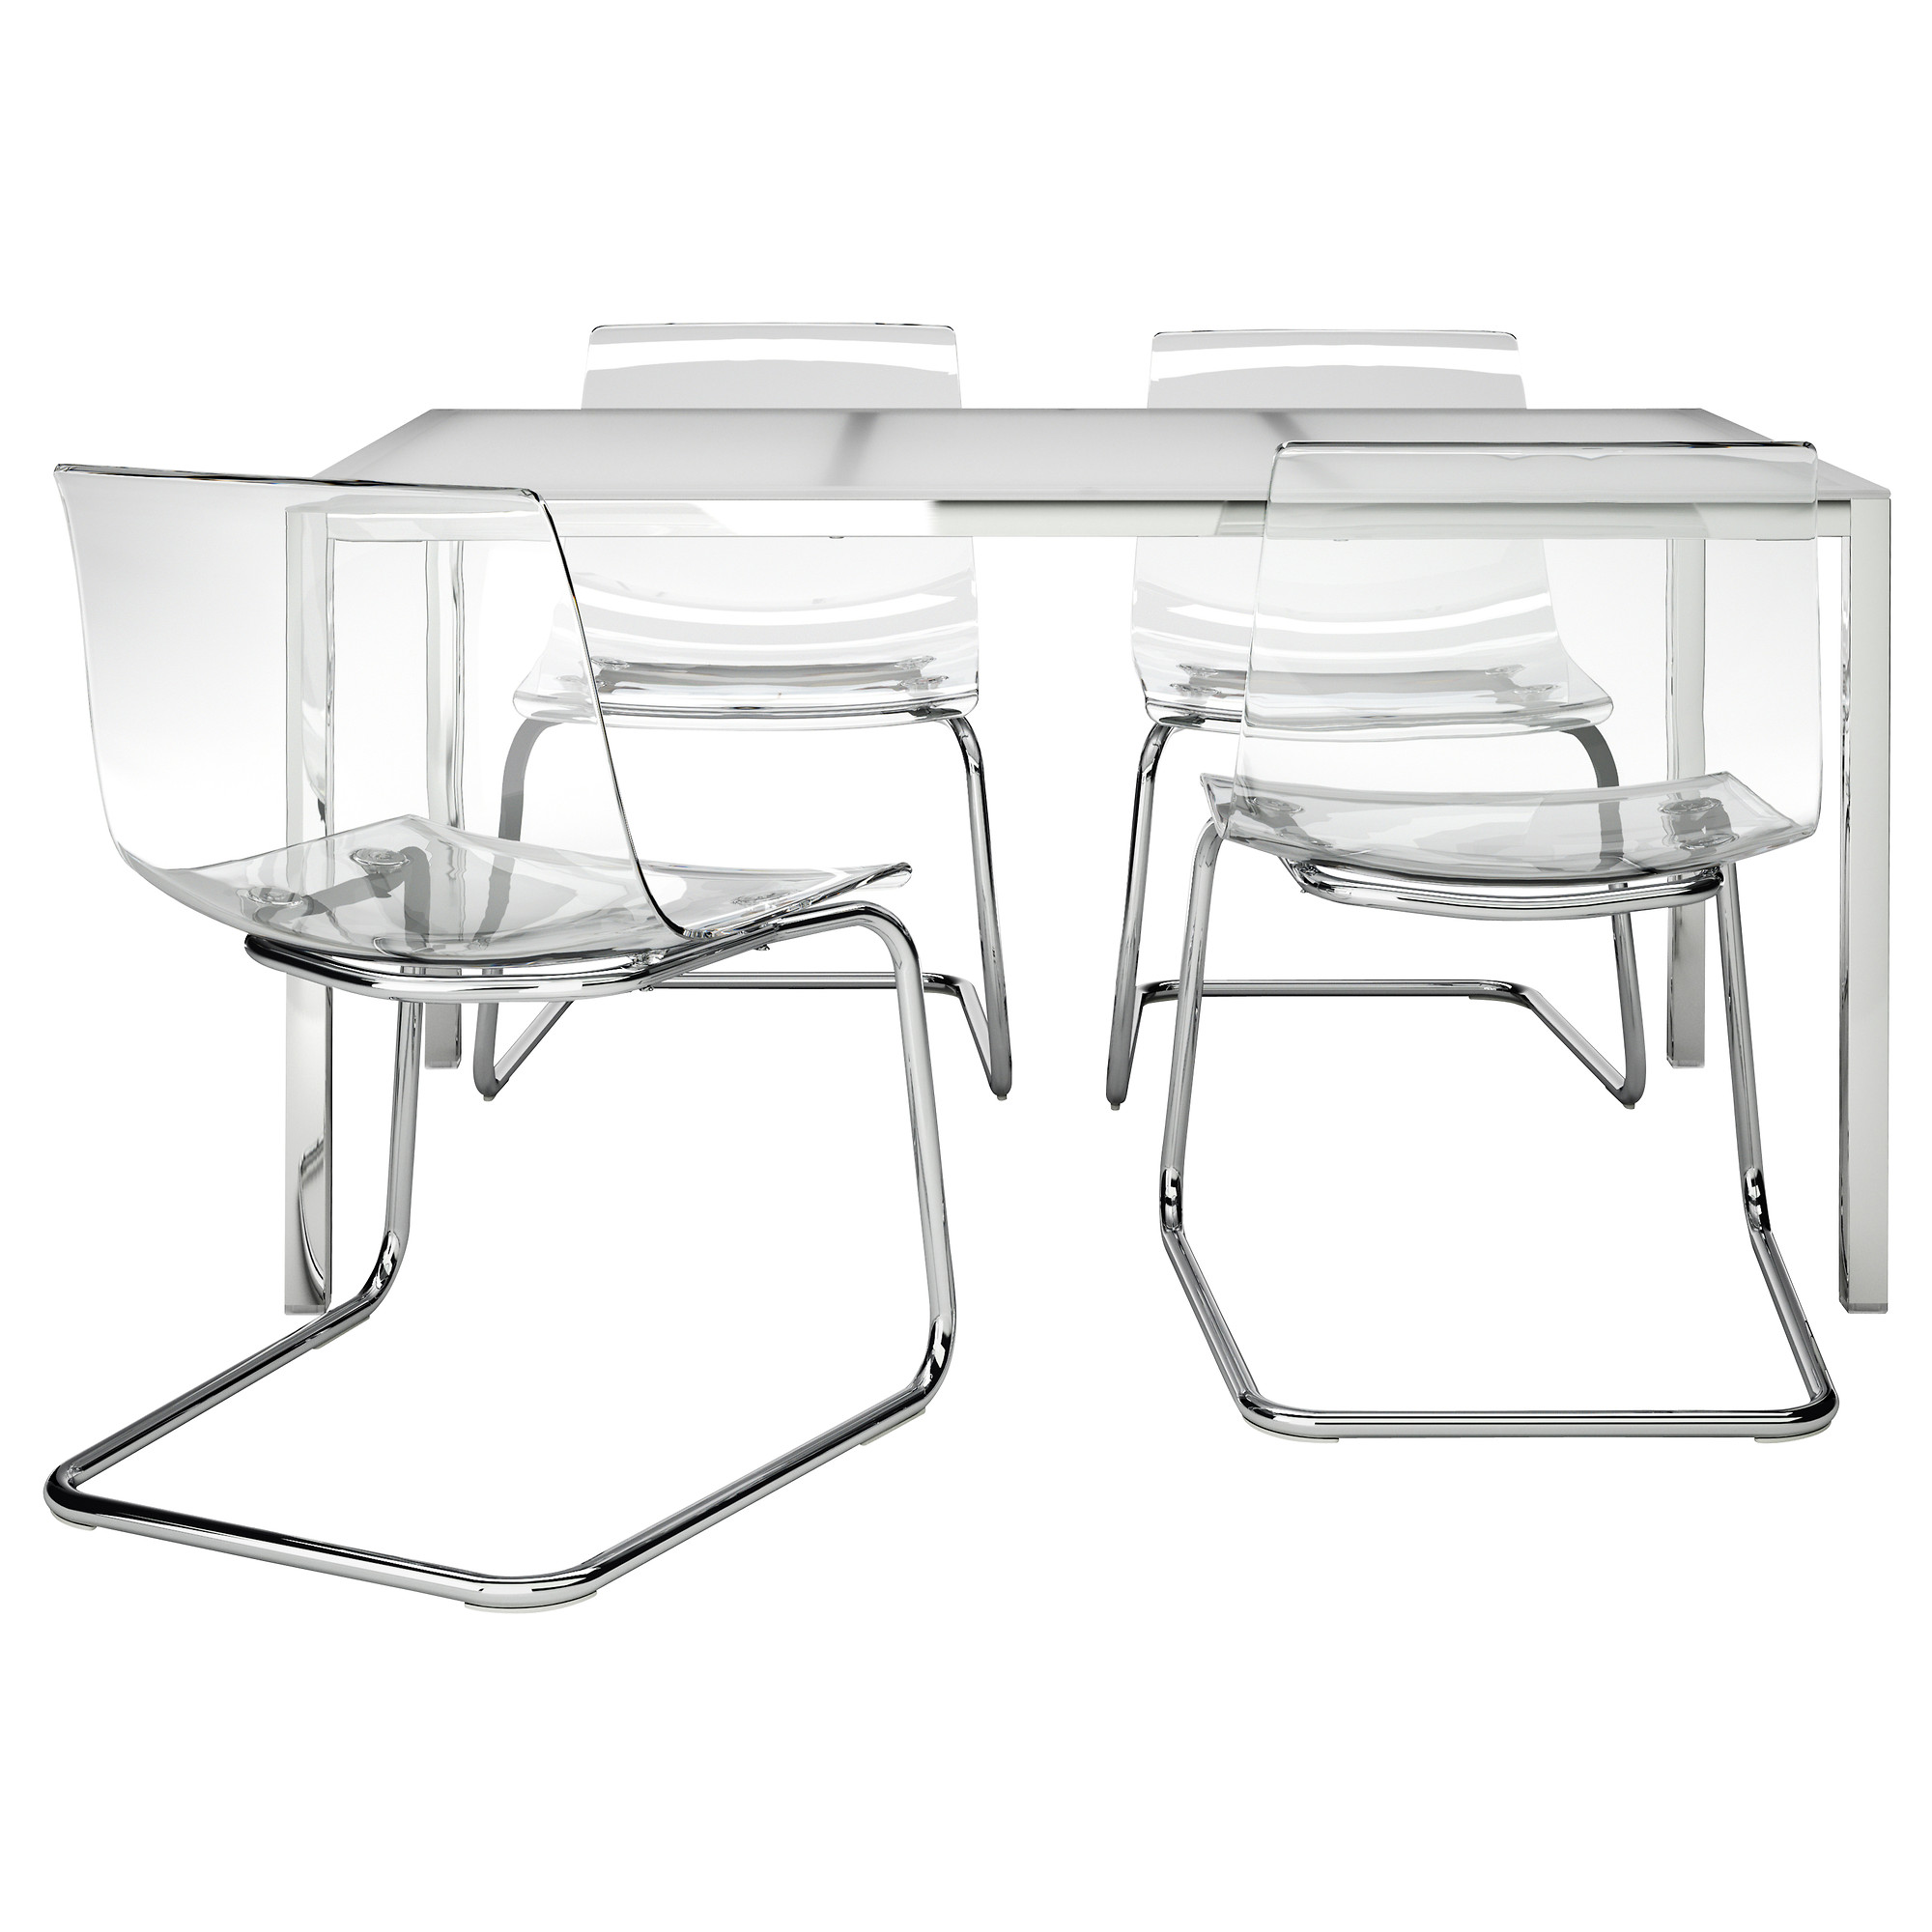 Torsby Tobias Table And 4 Chairs Glass White Transparent Ikea